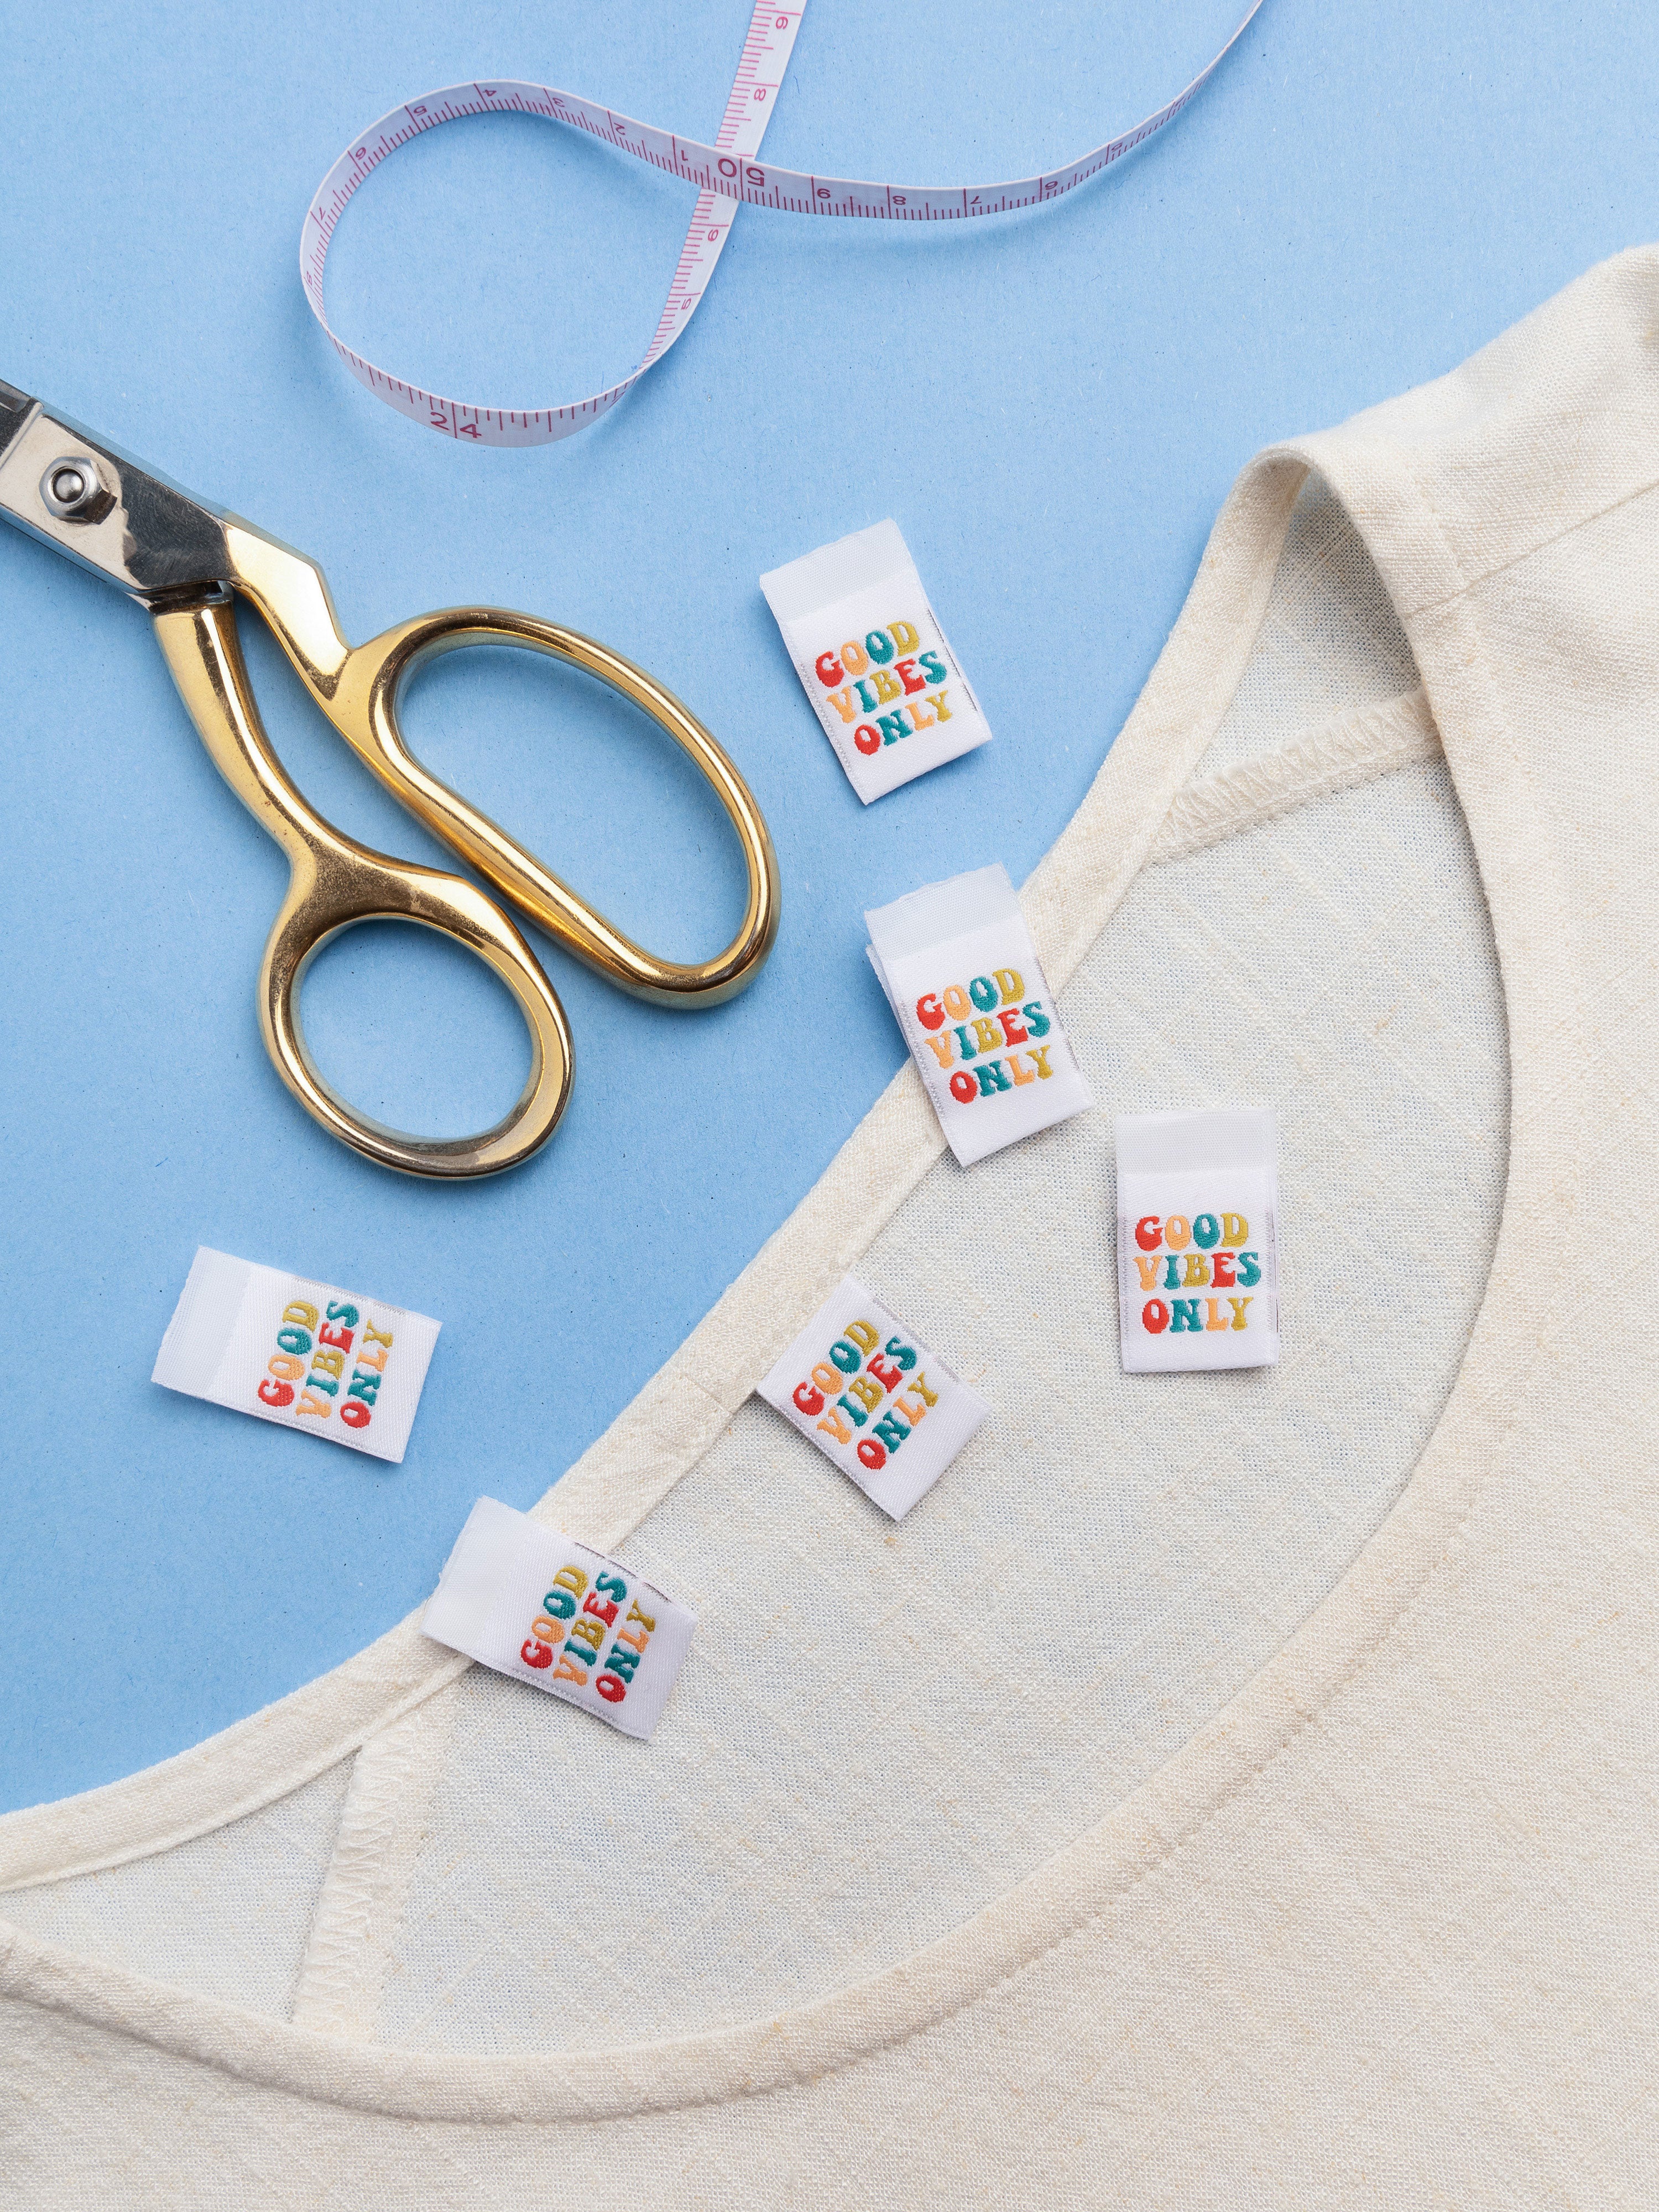 Core Fabrics Sewing Labels: 6 pack - Good Vibes Only